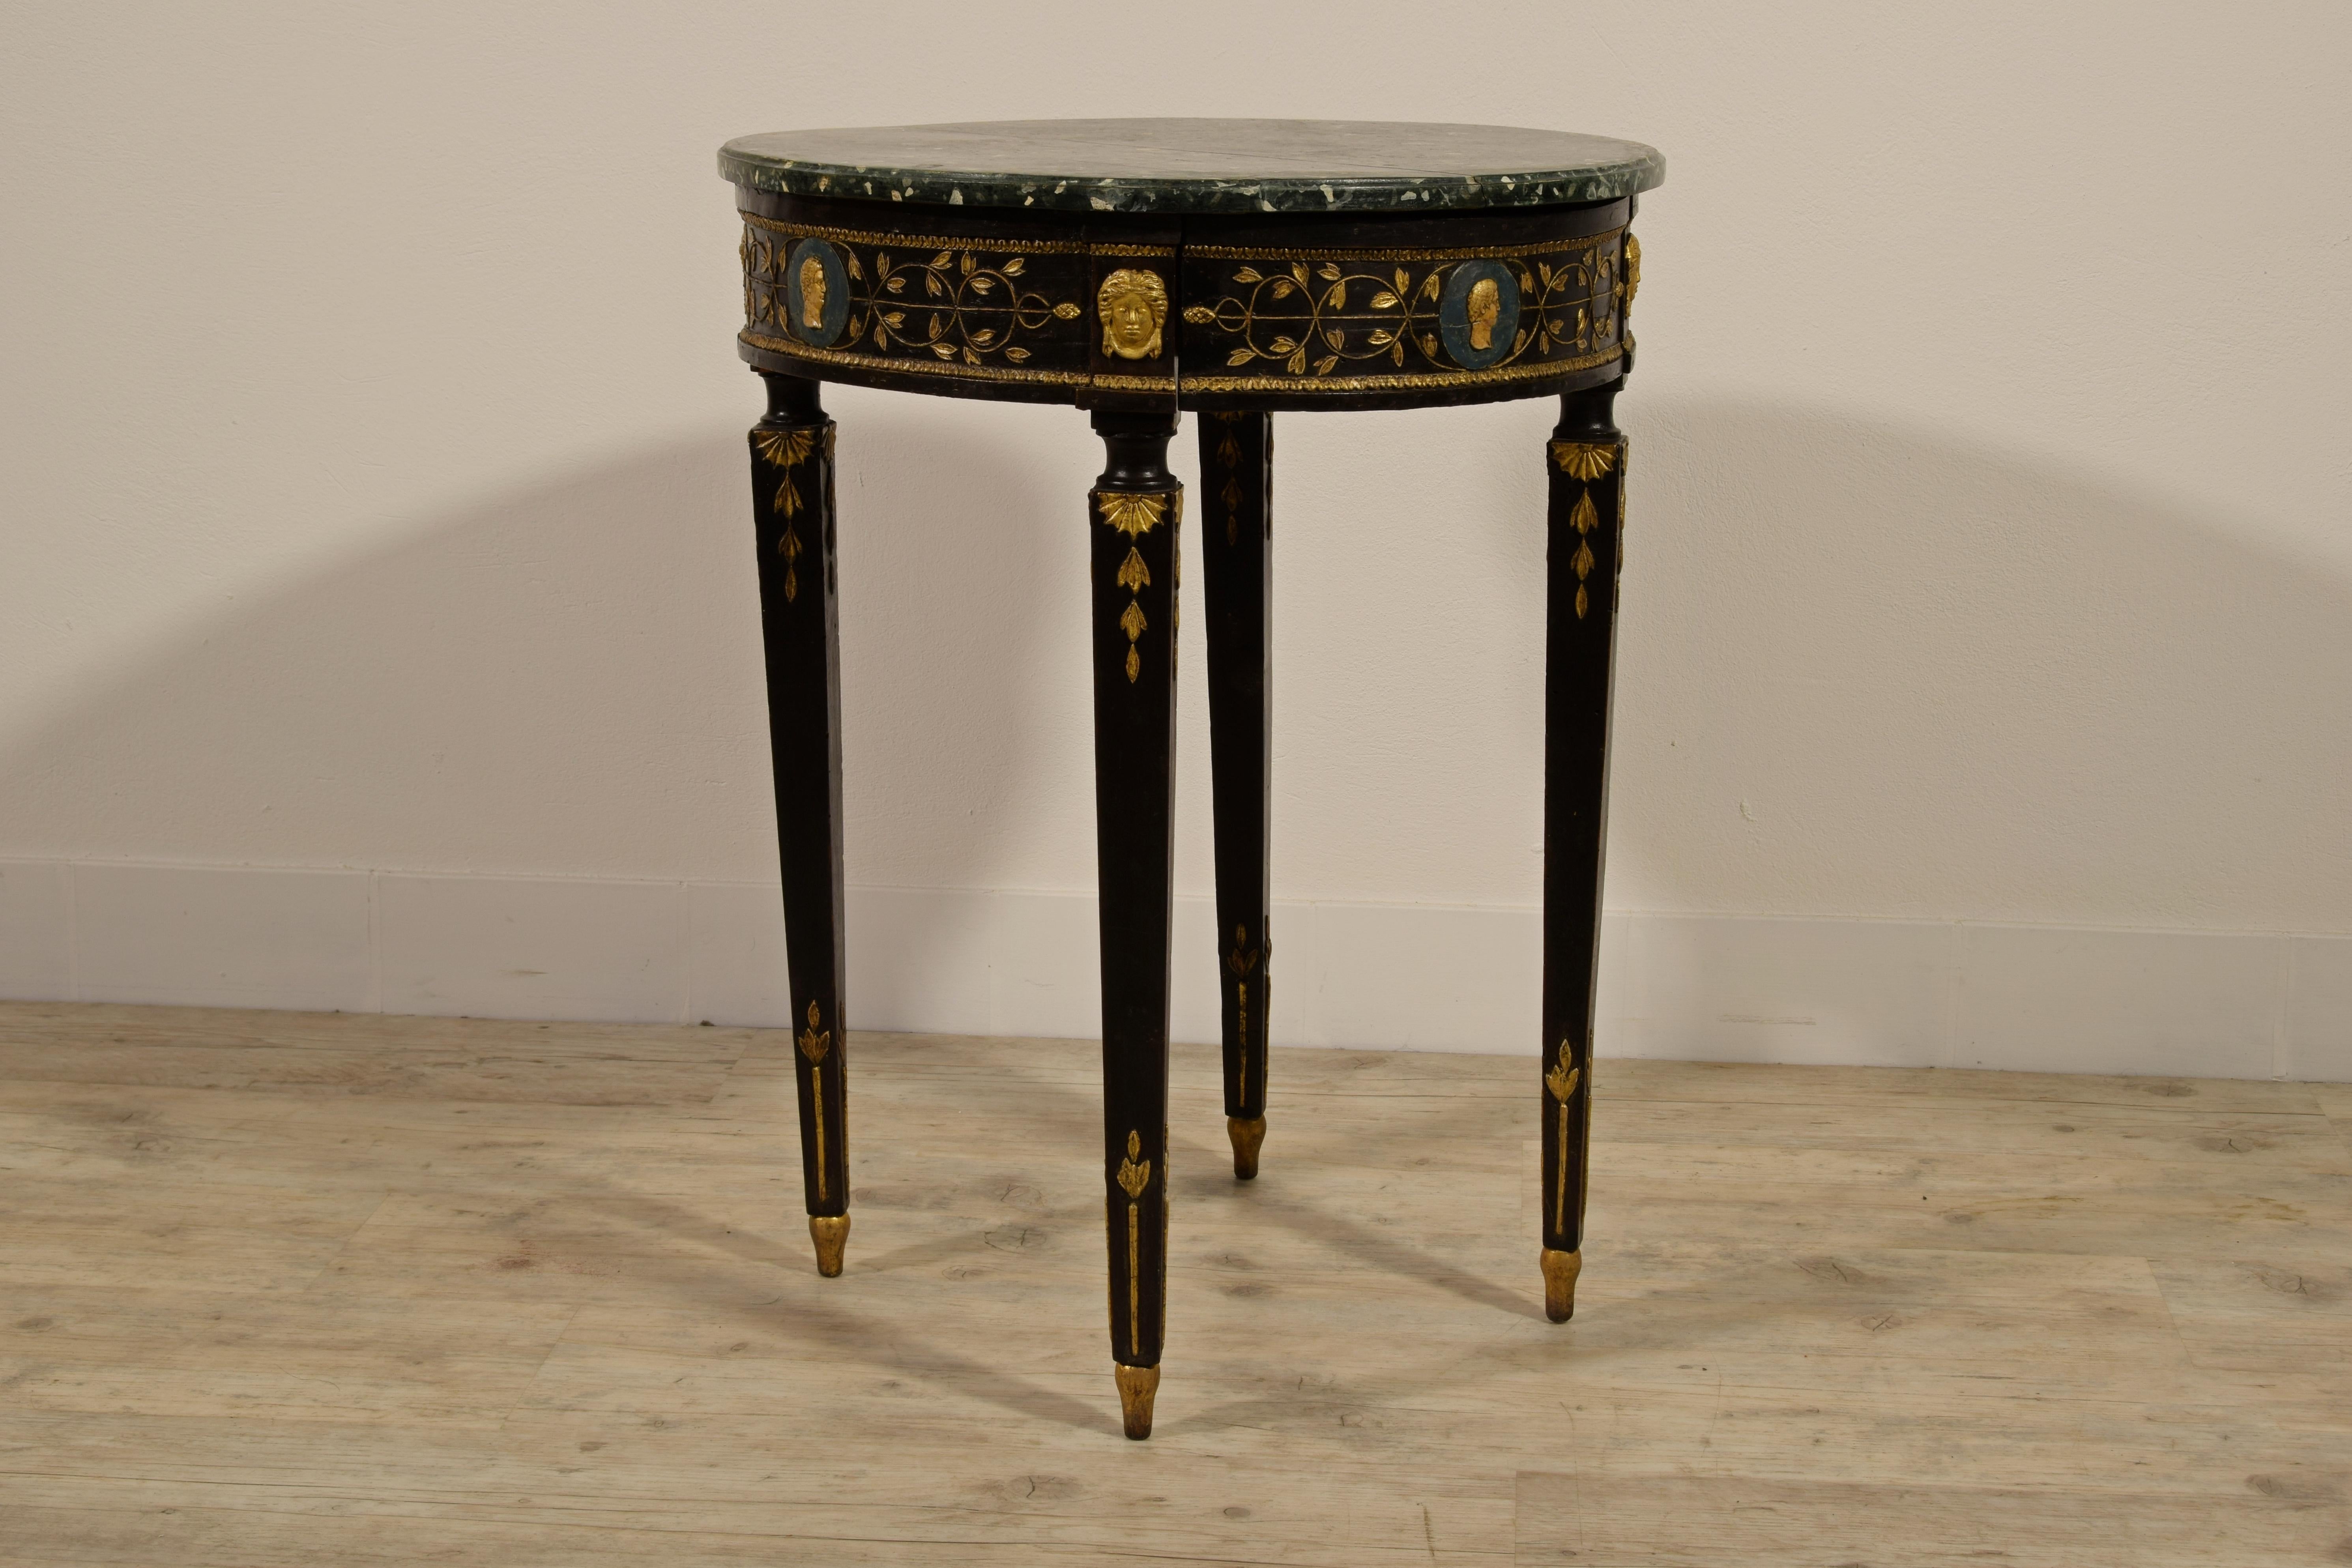 18th century, Italian neoclassical carved and lacquered wood coffee table

Elegant and refined coffee table, made in Tuscany (Italy) in the neoclassical era, circa end of the 18th century.
The coffee table is in finely carved wood with a Classic